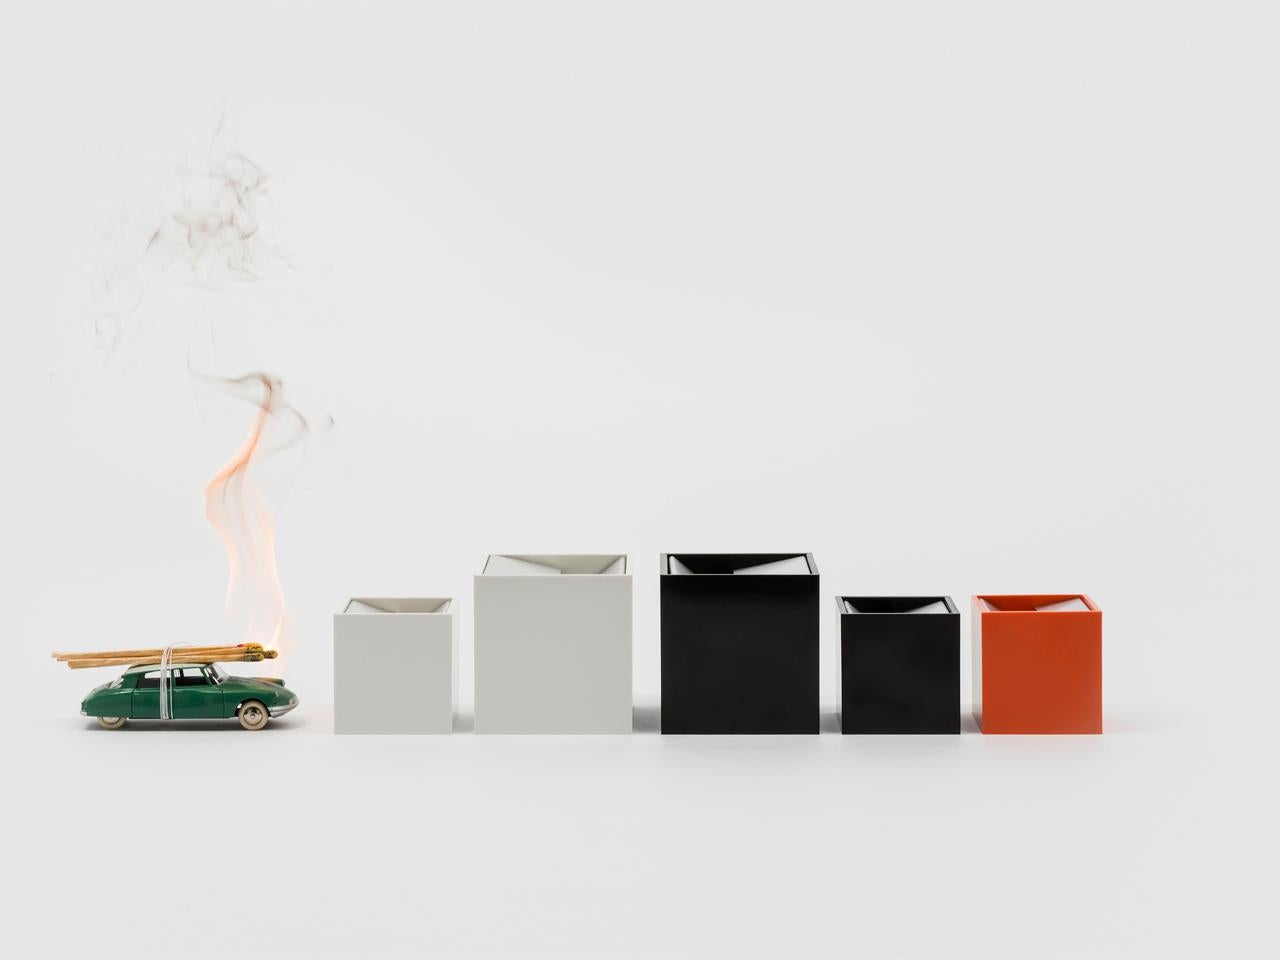 Larger White Cubo is an ashtray made up of two simple elements: a cube shaped shell open on one side contains an element made of bent sheet metal. This element is designed so that the acute angle of one end of the sheet makes the ash fall inside